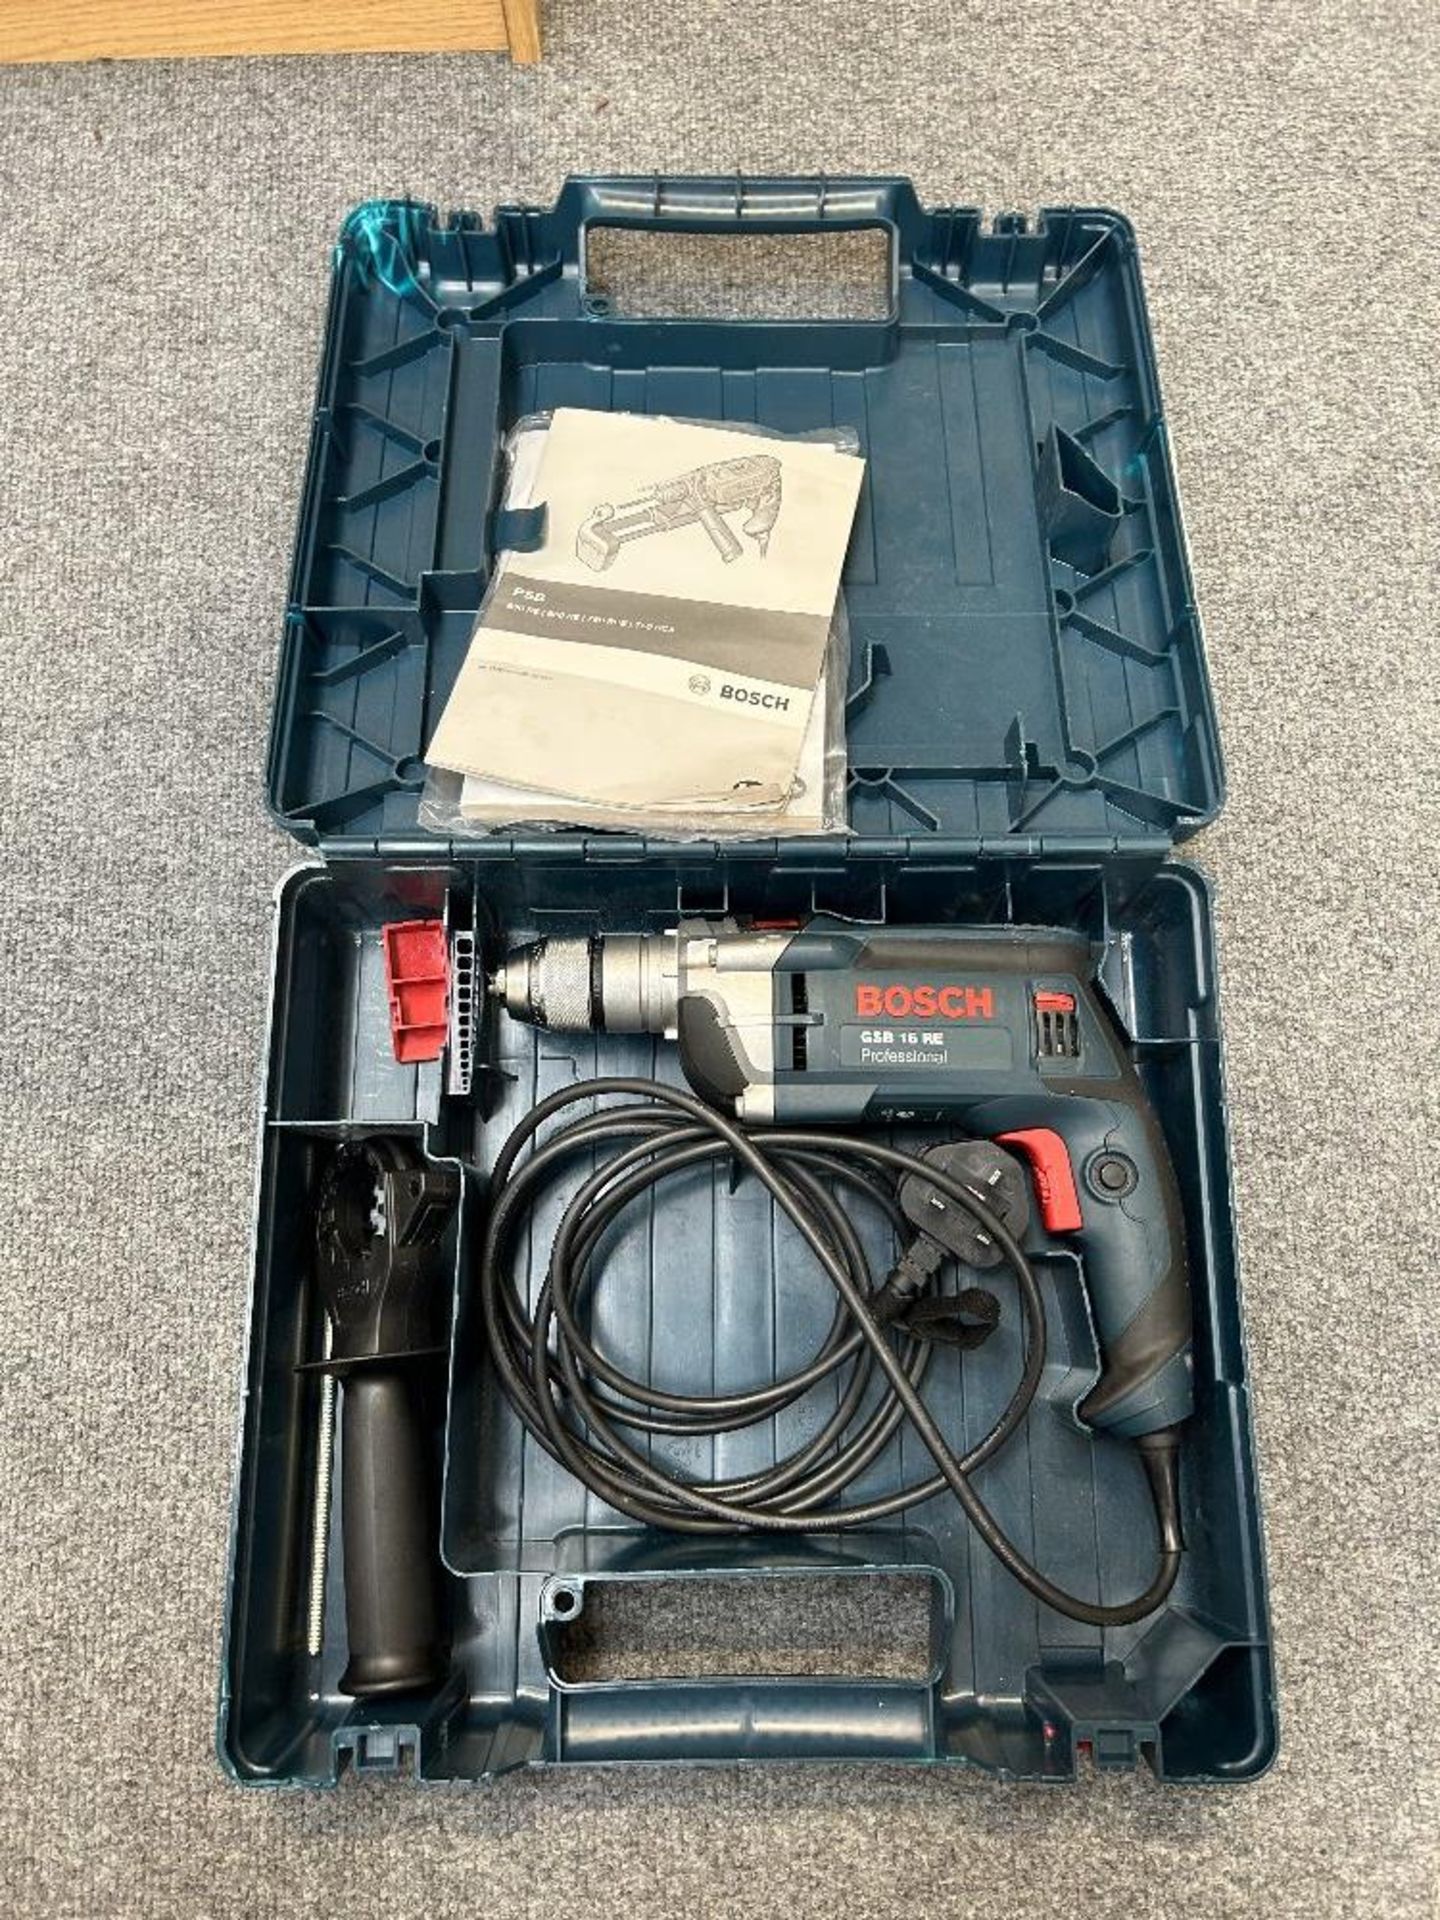 Bosch GSB 16 RE Professional 240v drill with plastic carry case